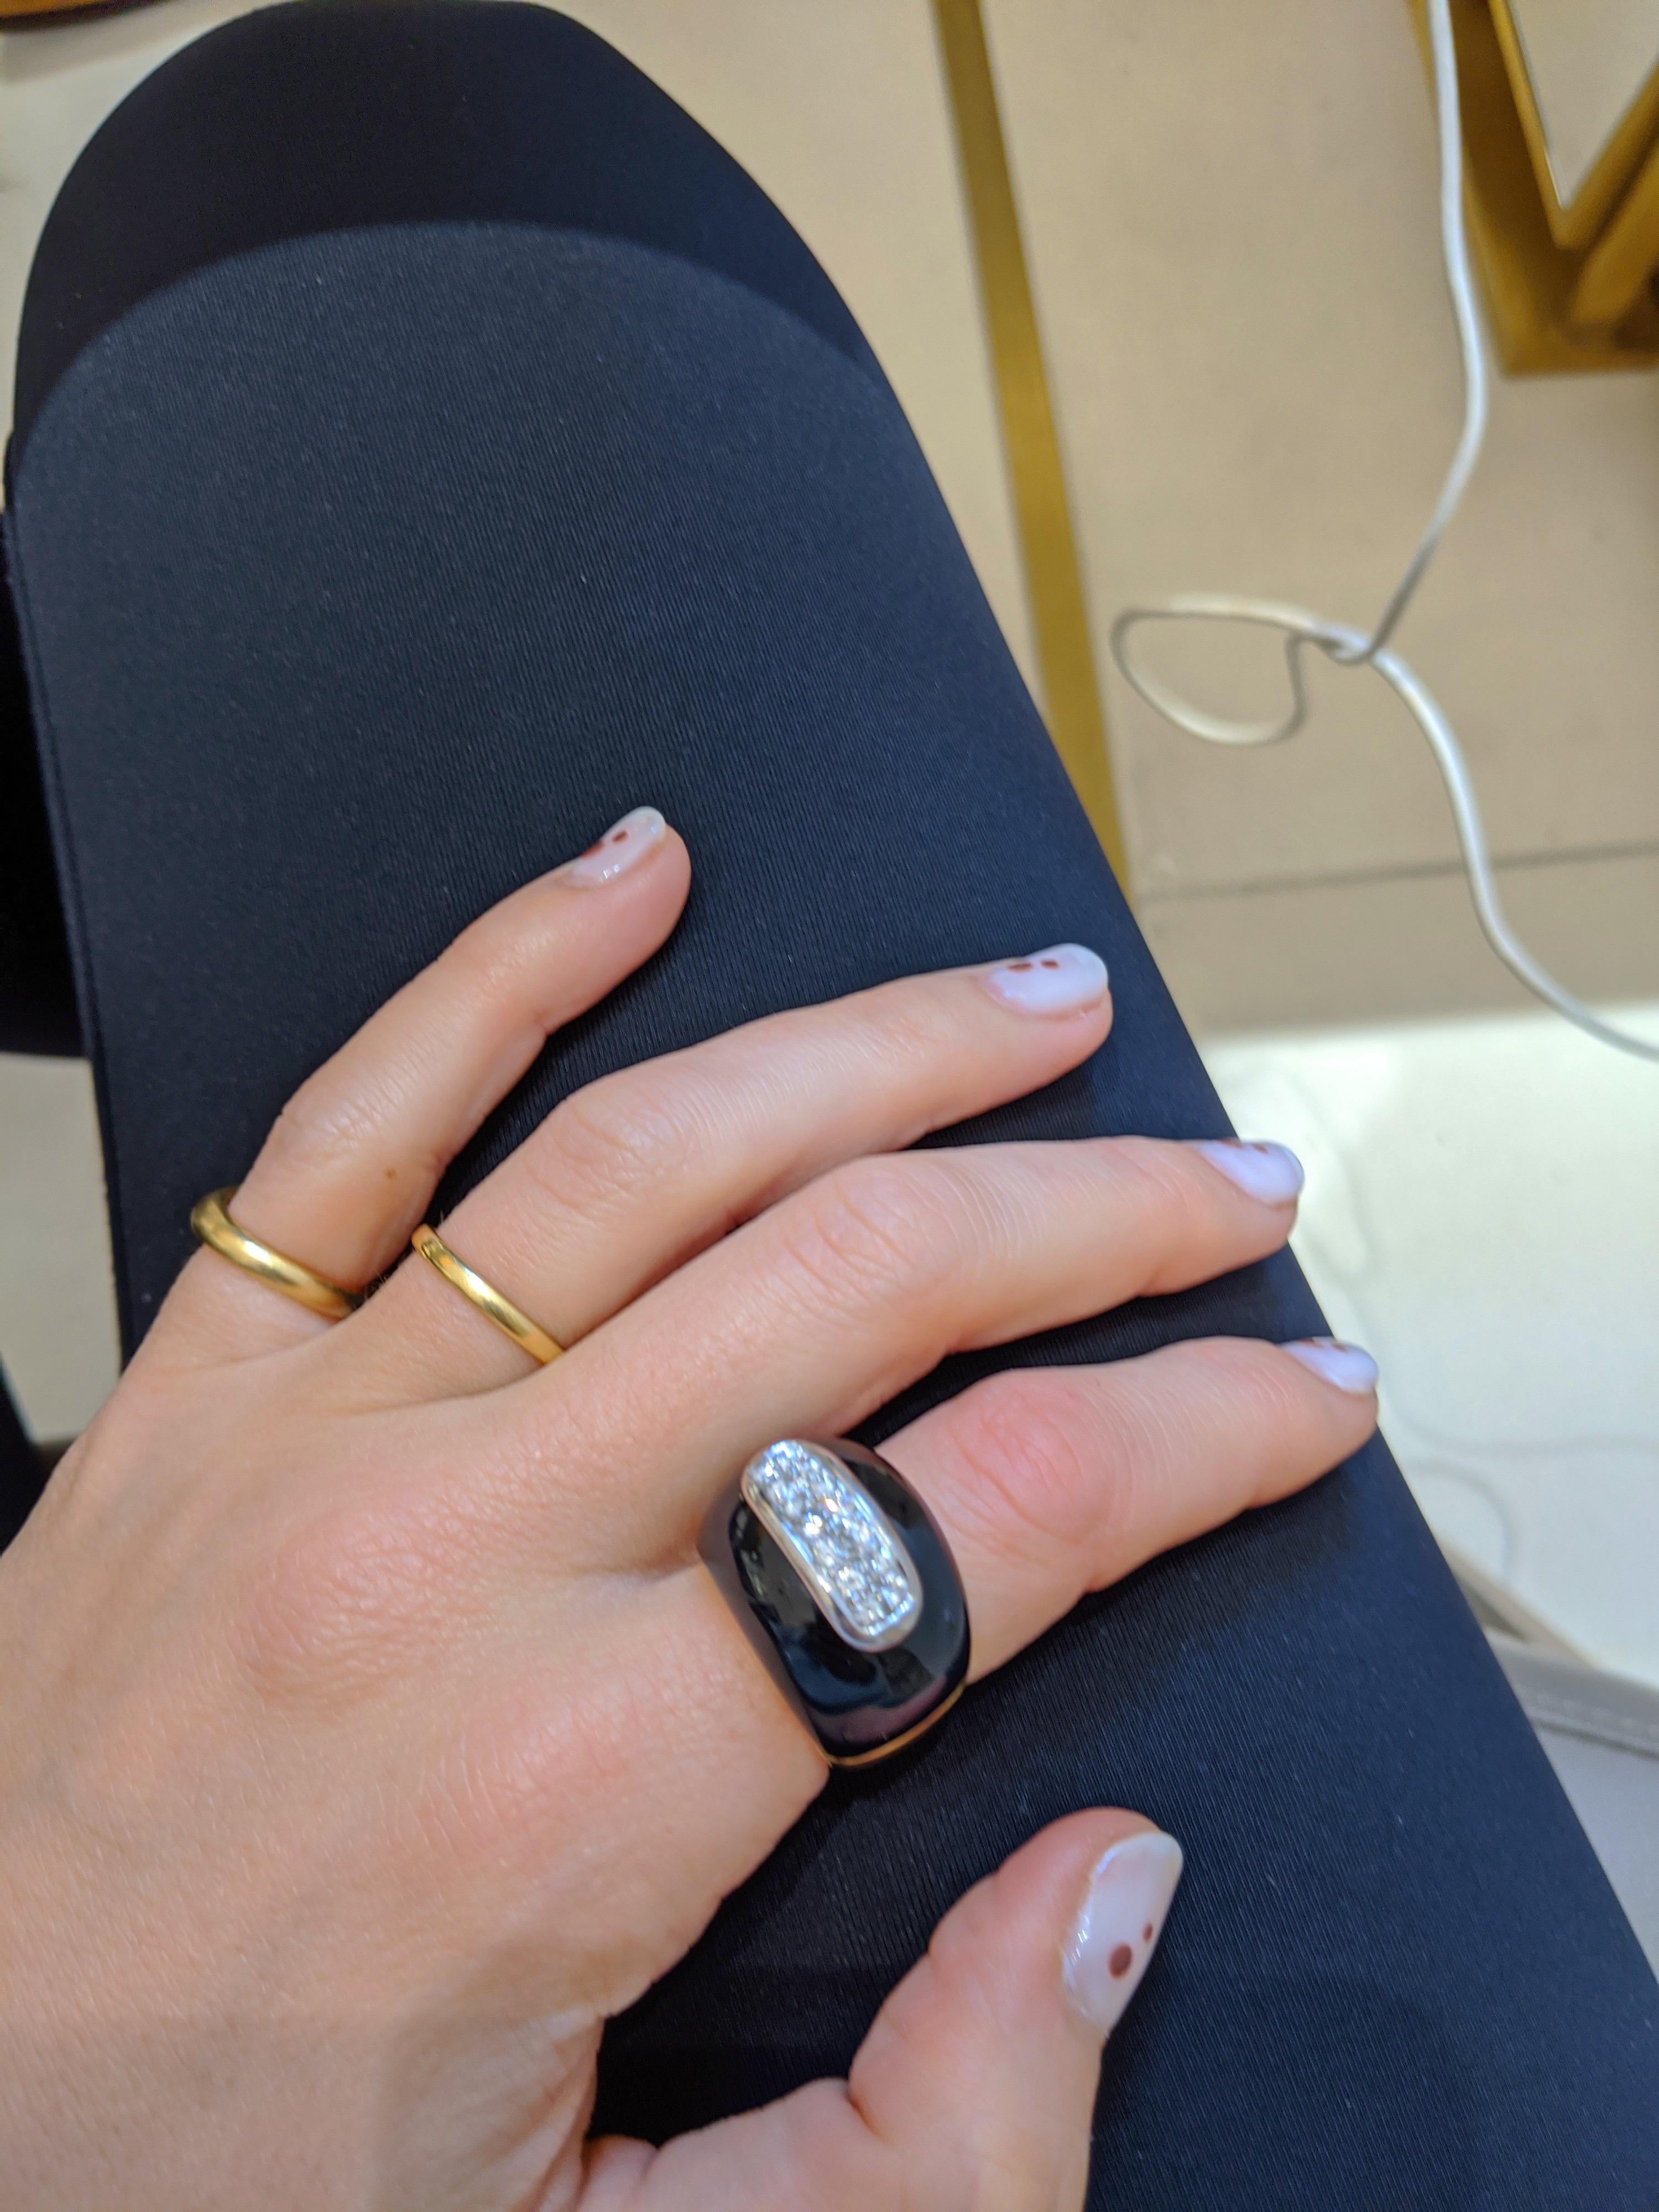 Retro 18 karat yellow gold ring designed with a dome of Black Onyx.  Fourteen round brilliant Diamonds set in a  white gold are bezel set on top of the Onyx.
Total Diamond weight 0.42 carats
Finger size 6 3/4